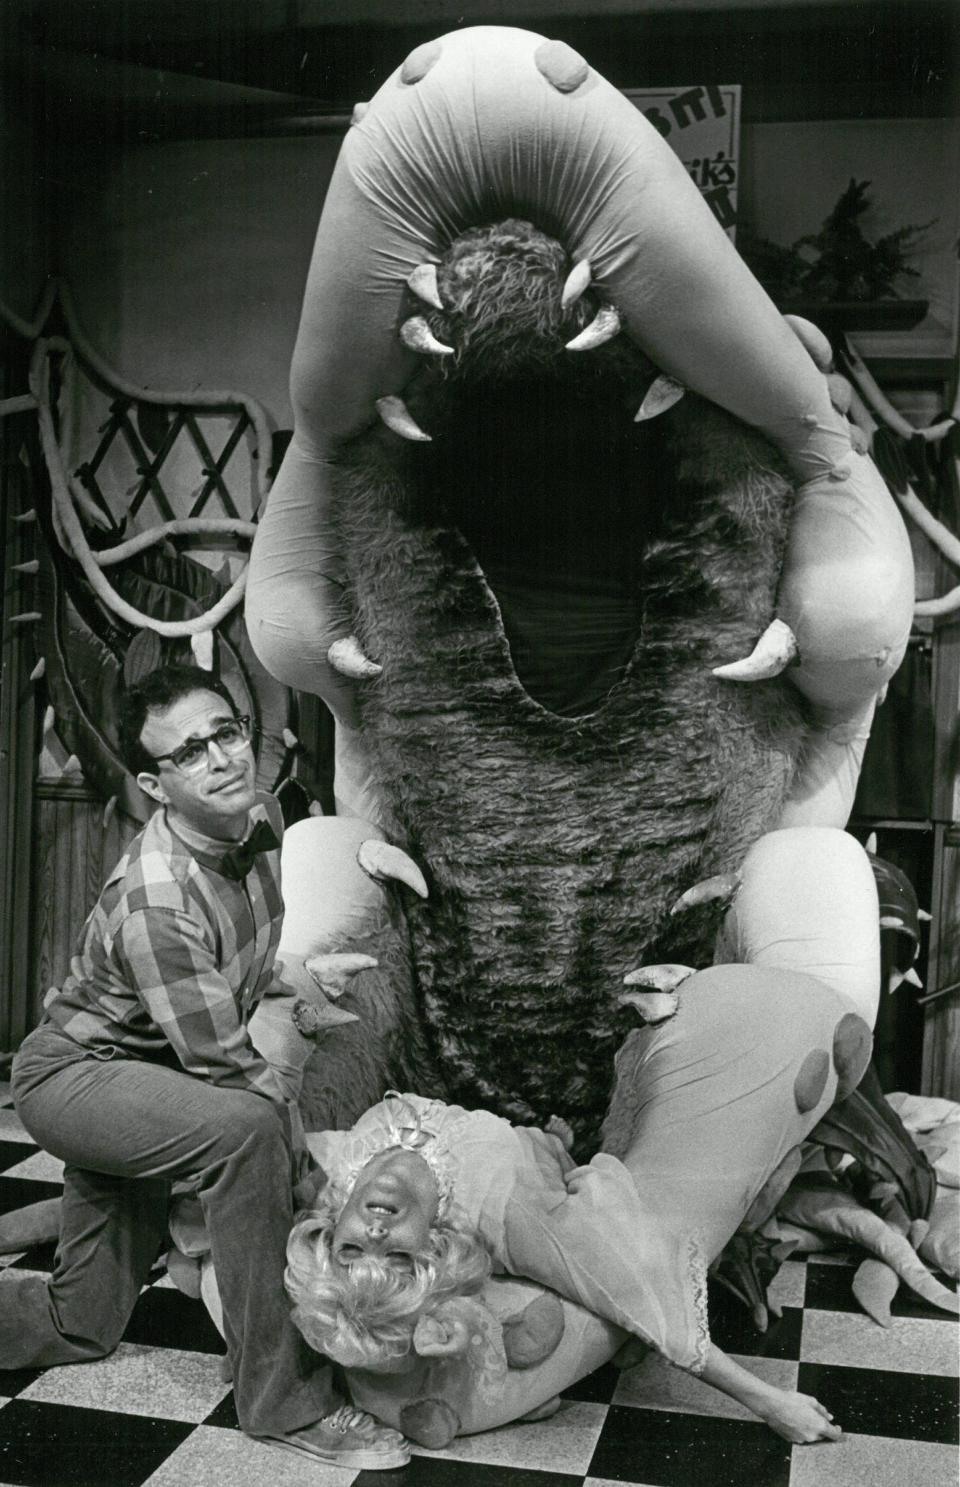 In this 1988 Alhambra production of "Little Shop of Horrors," Glen Rosenbue and Ellen Zaches star along with Audrey II, the giant people-eating plant.